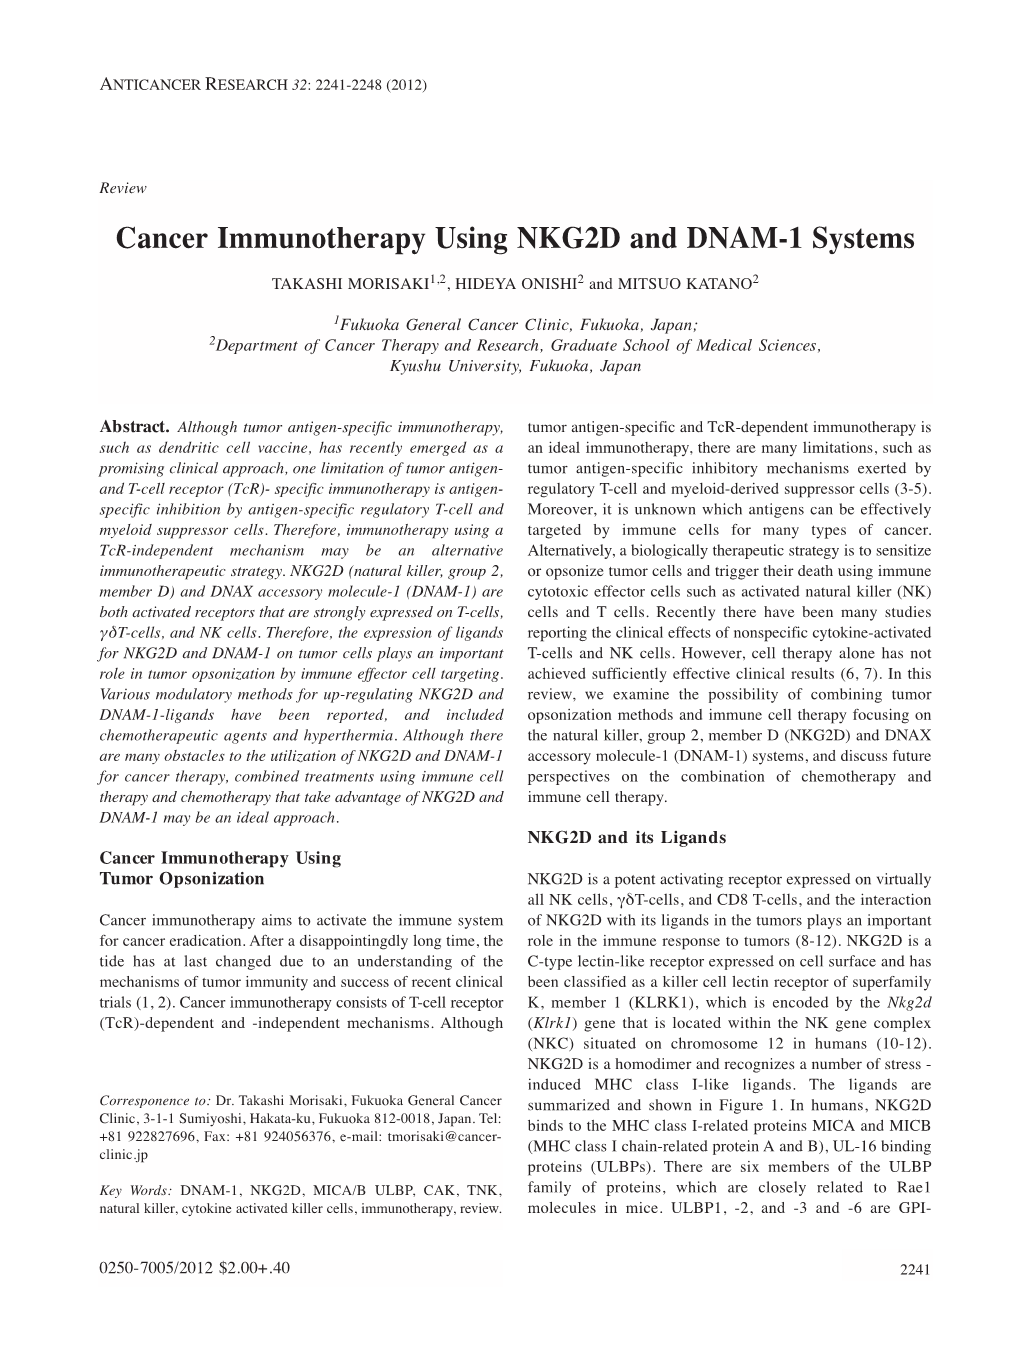 Cancer Immunotherapy Using NKG2D and DNAM-1 Systems